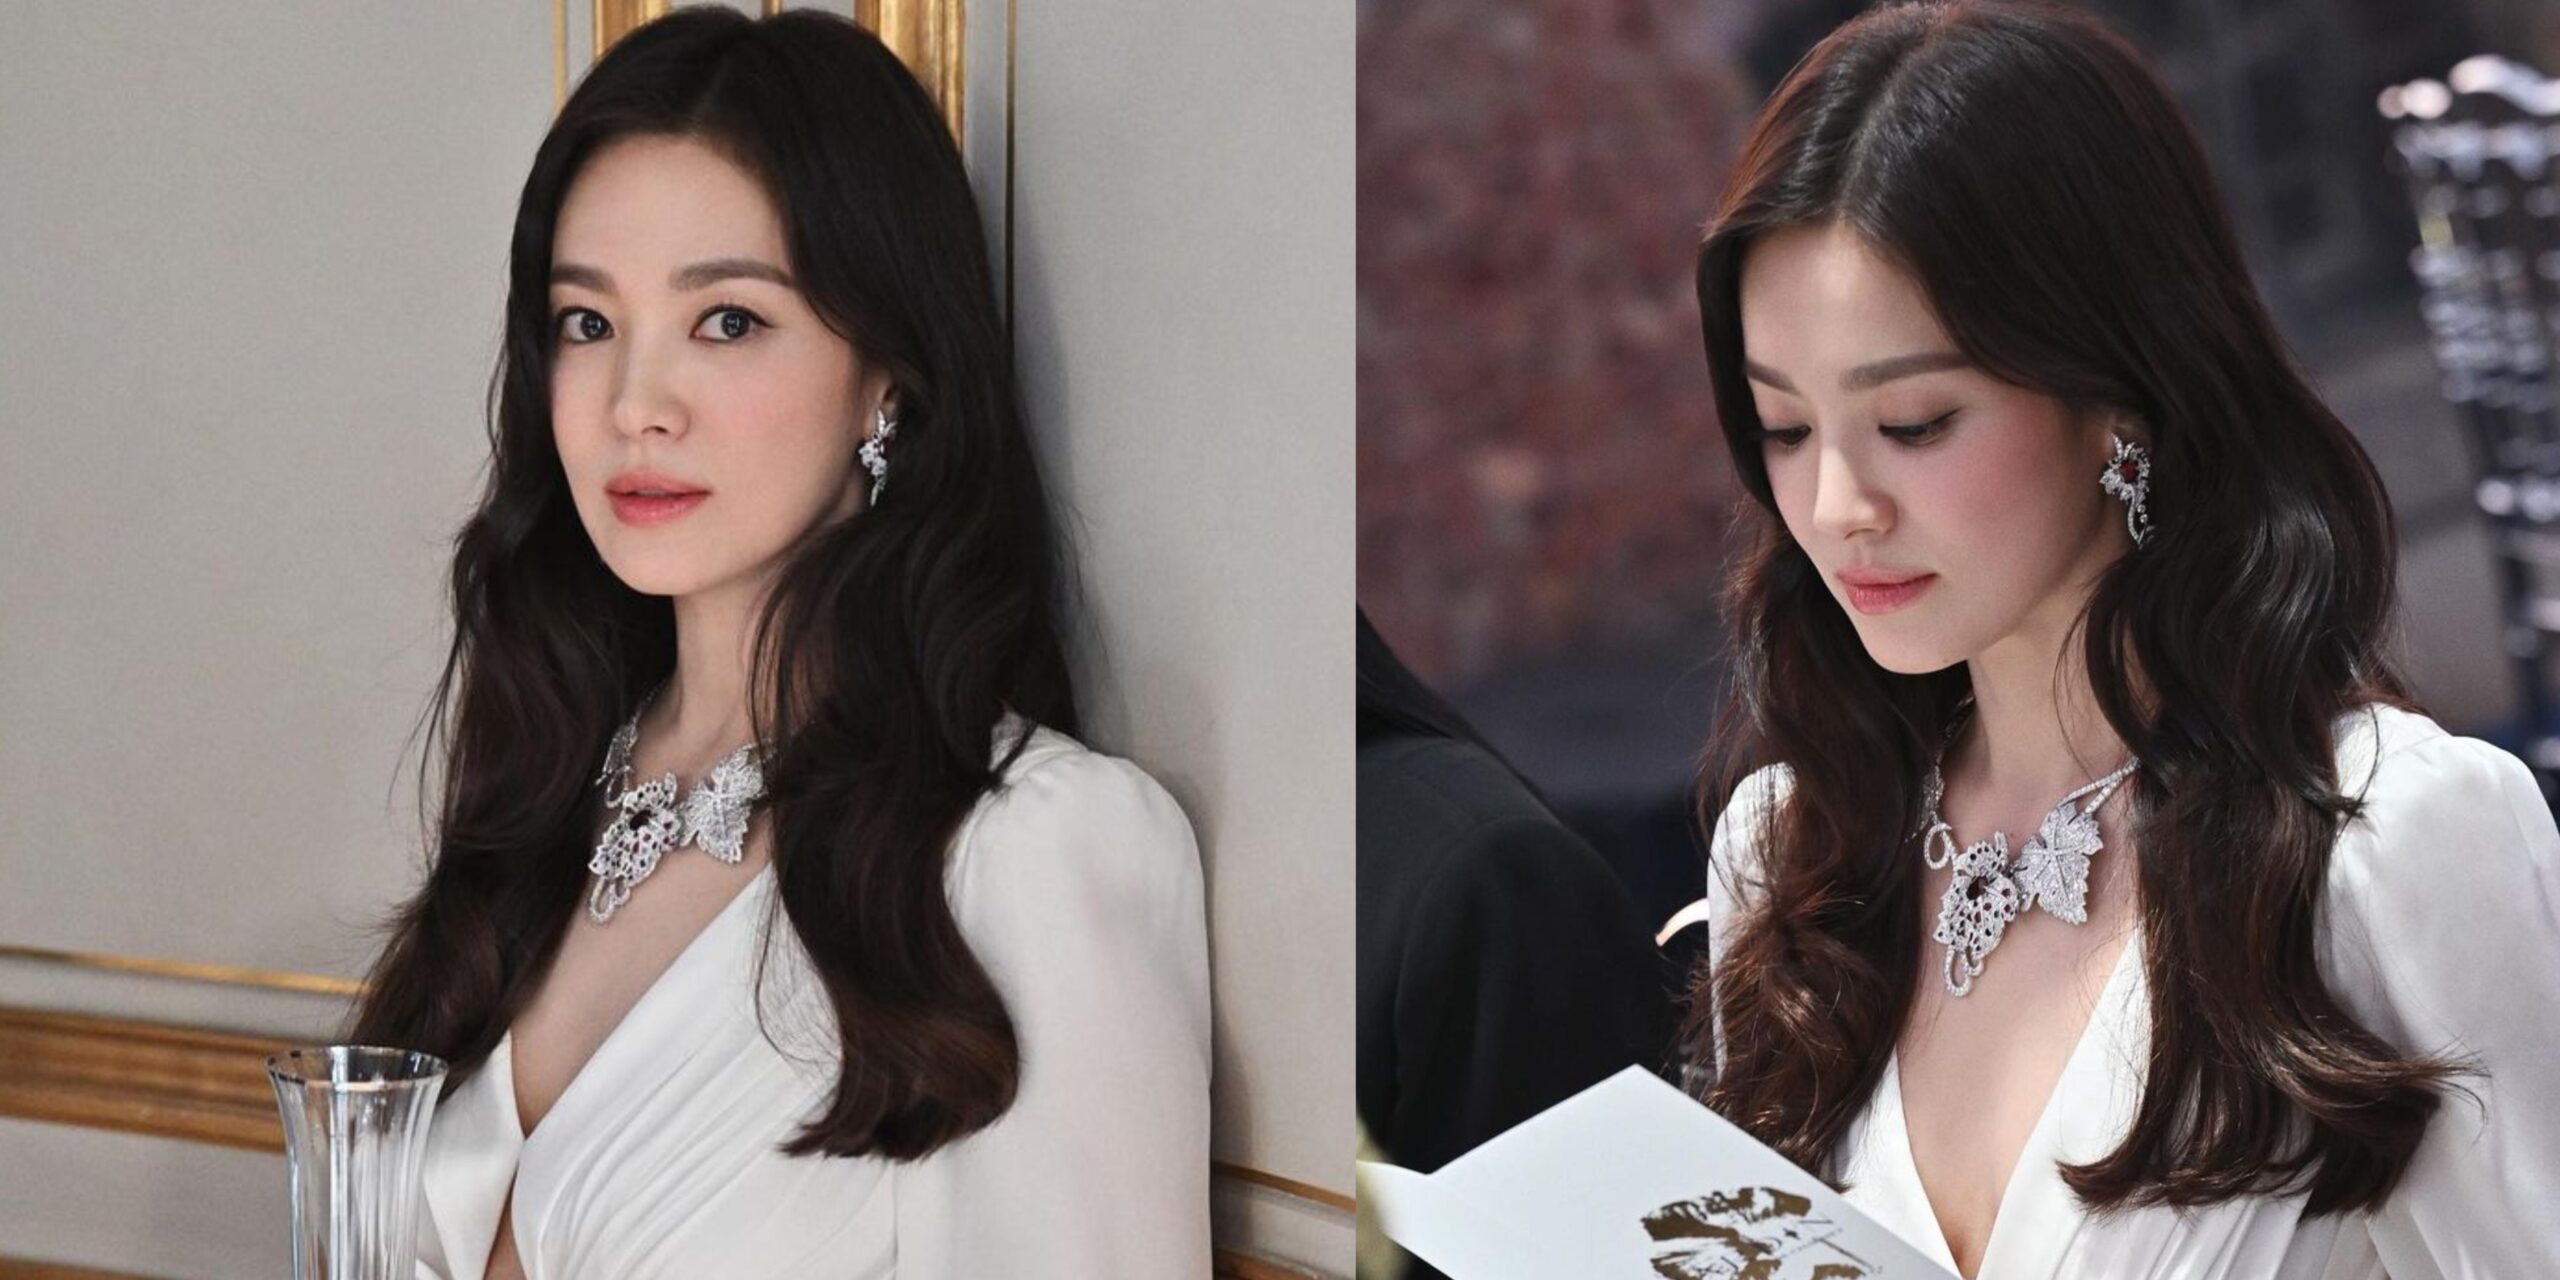 Insane visuals': Cha Eun-woo and Song Hye-kyo mesmerize fans at Chaumet  event - Entertainment